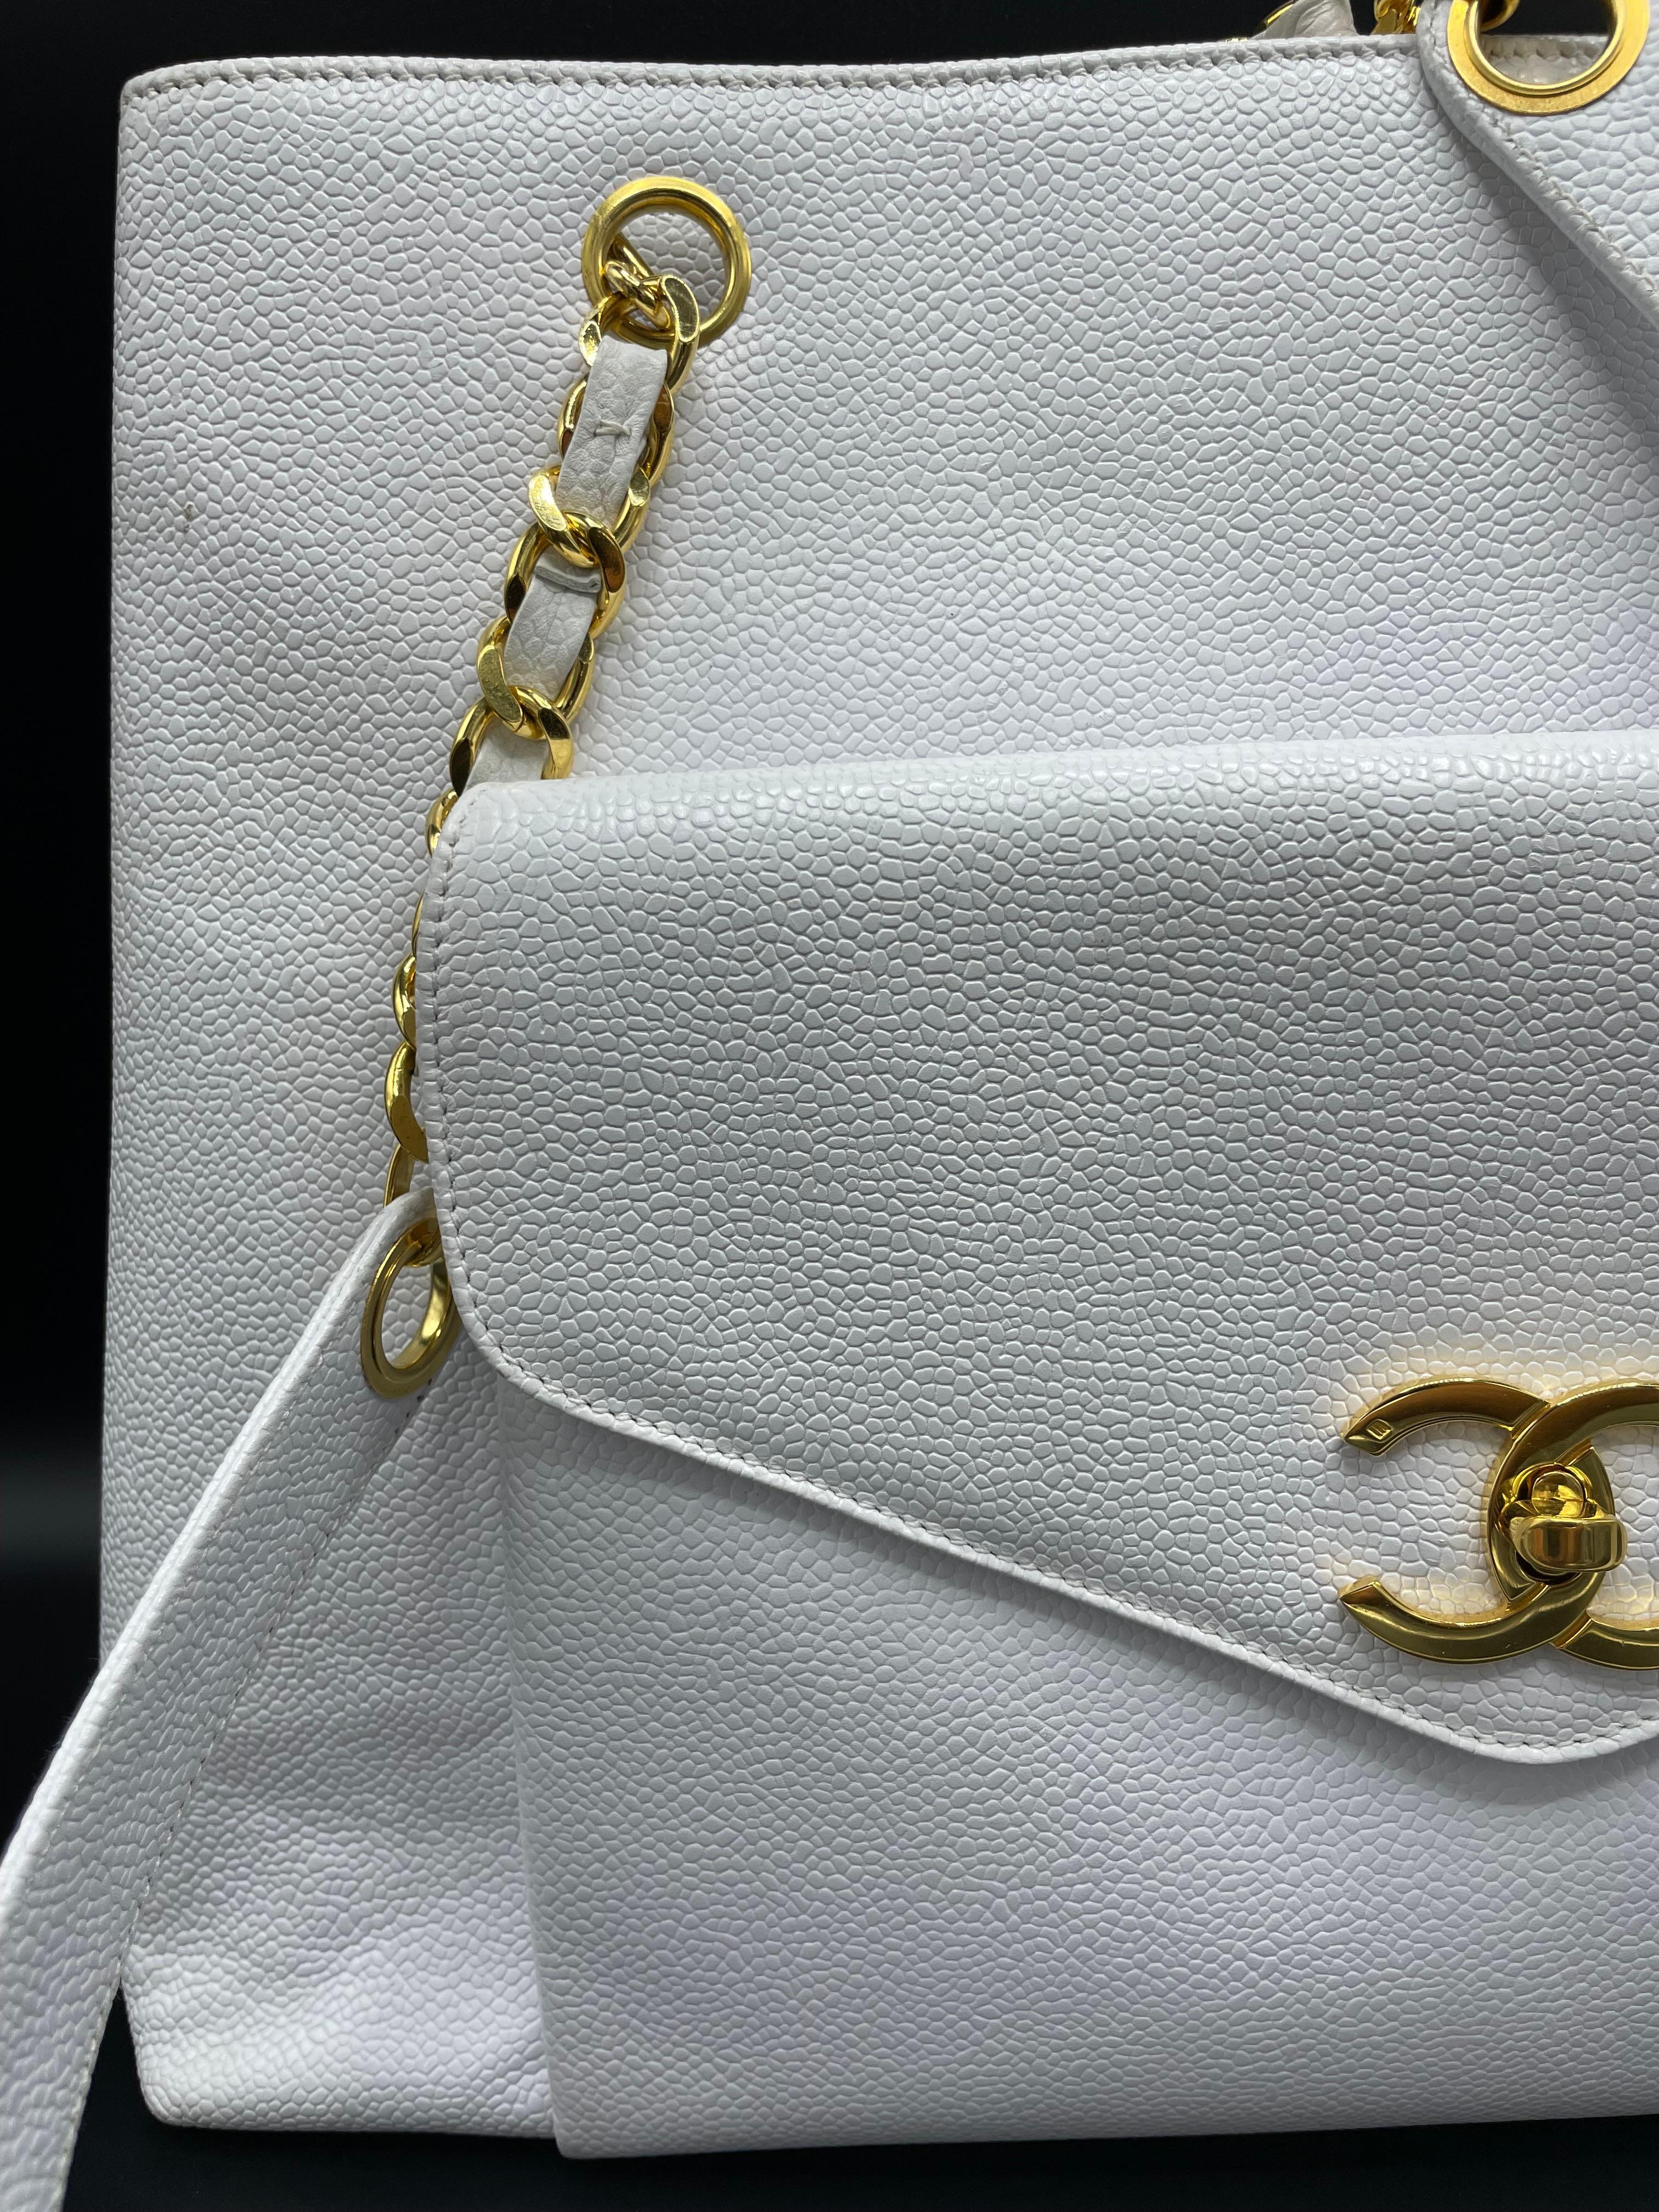 Chanel White Caviar Leather Front Pocket Tote Bag In Good Condition For Sale In Palm Beach, FL